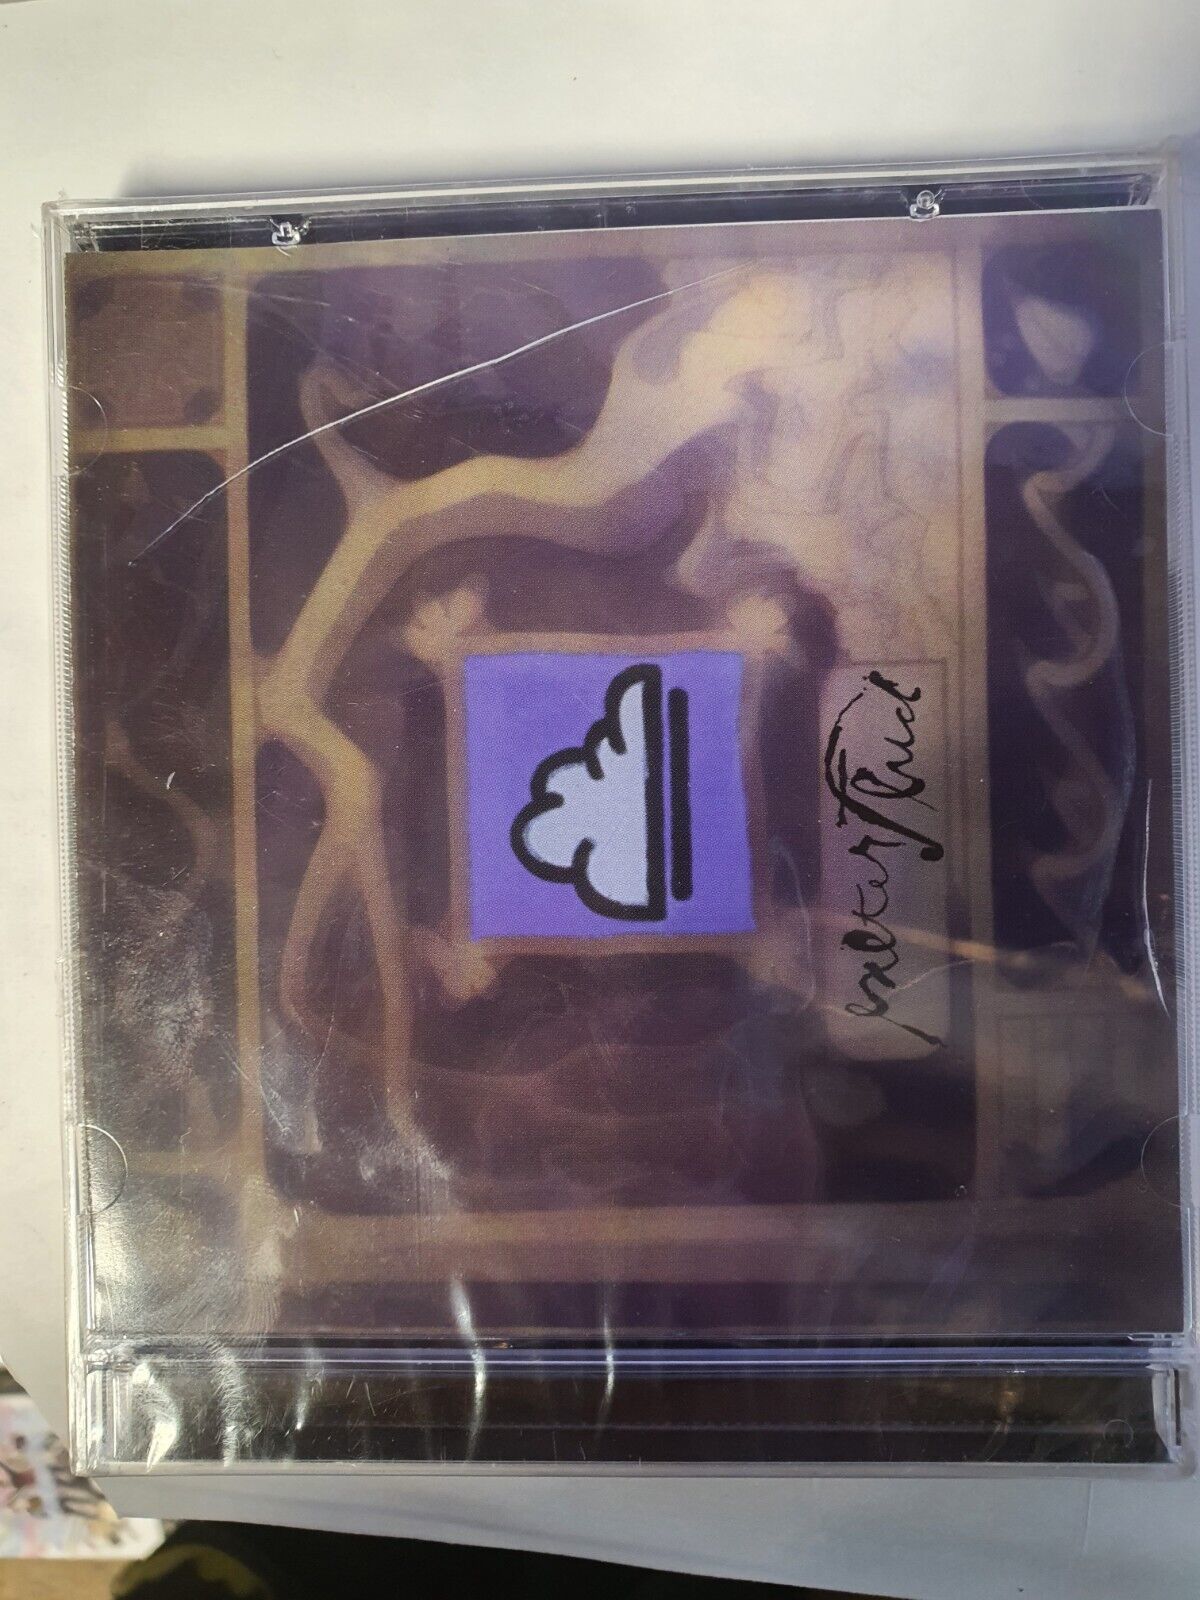 Primary image for Exeter Flud - Exeter Flud CD NEW SEALED/ 1 LINE OF CRACK ON FRONT COVER